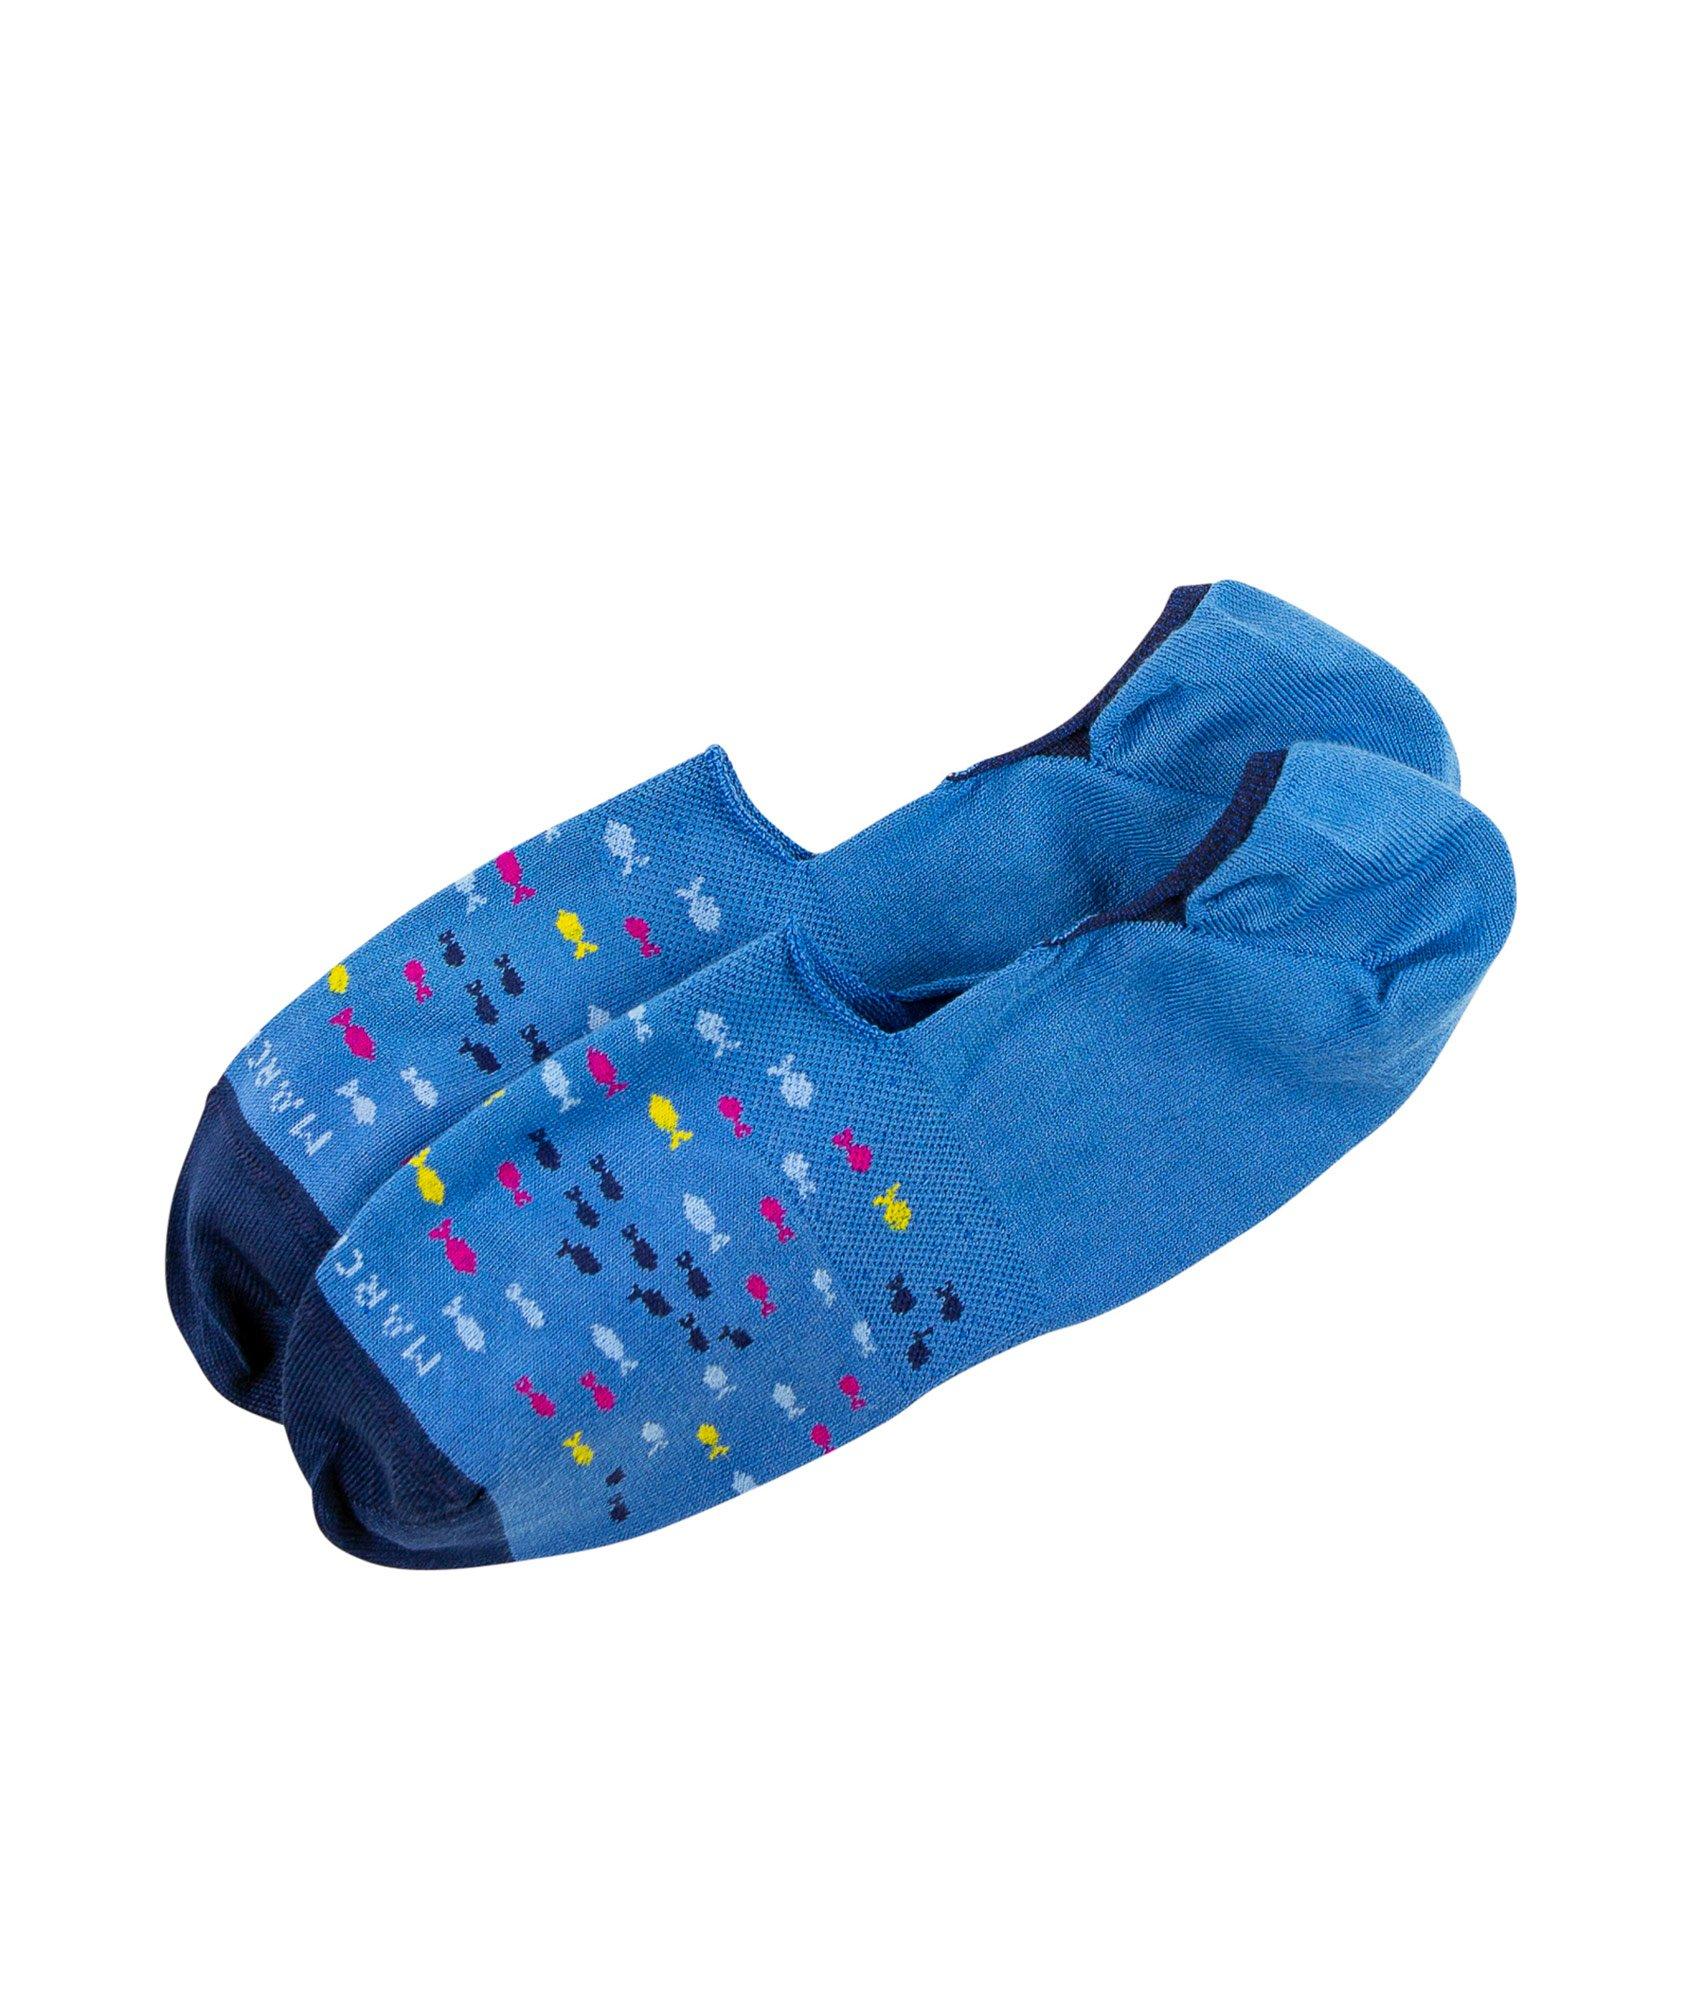 Invisible Touch Socks image 0